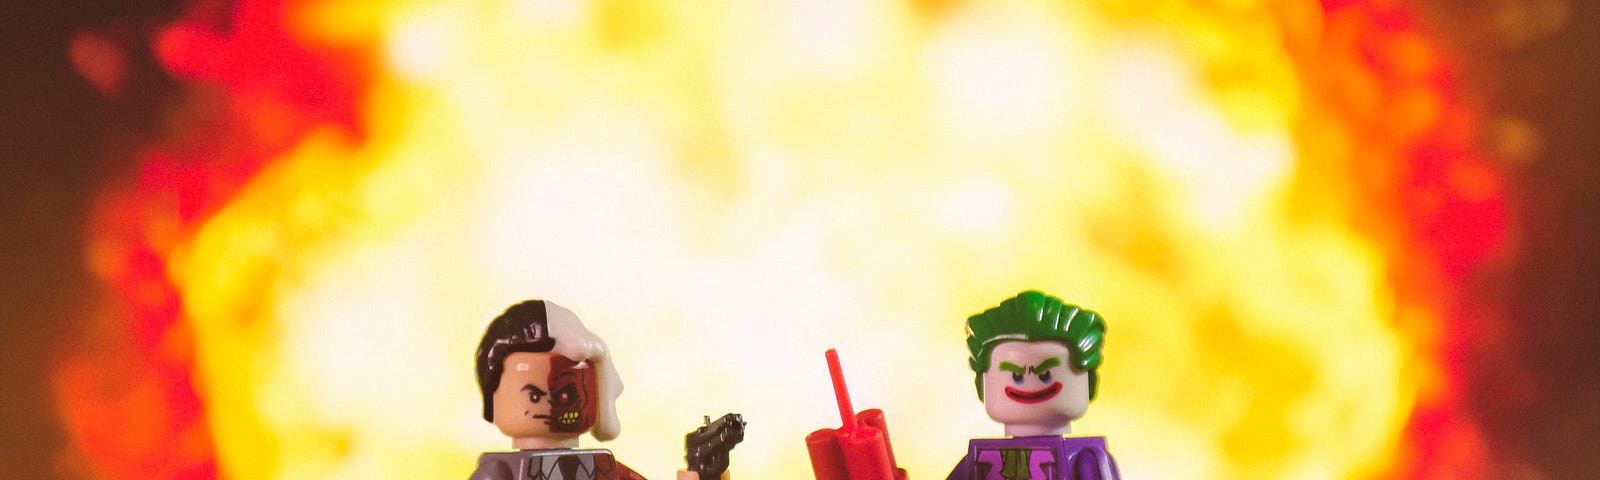 Two lego villains stand in front of an explosion